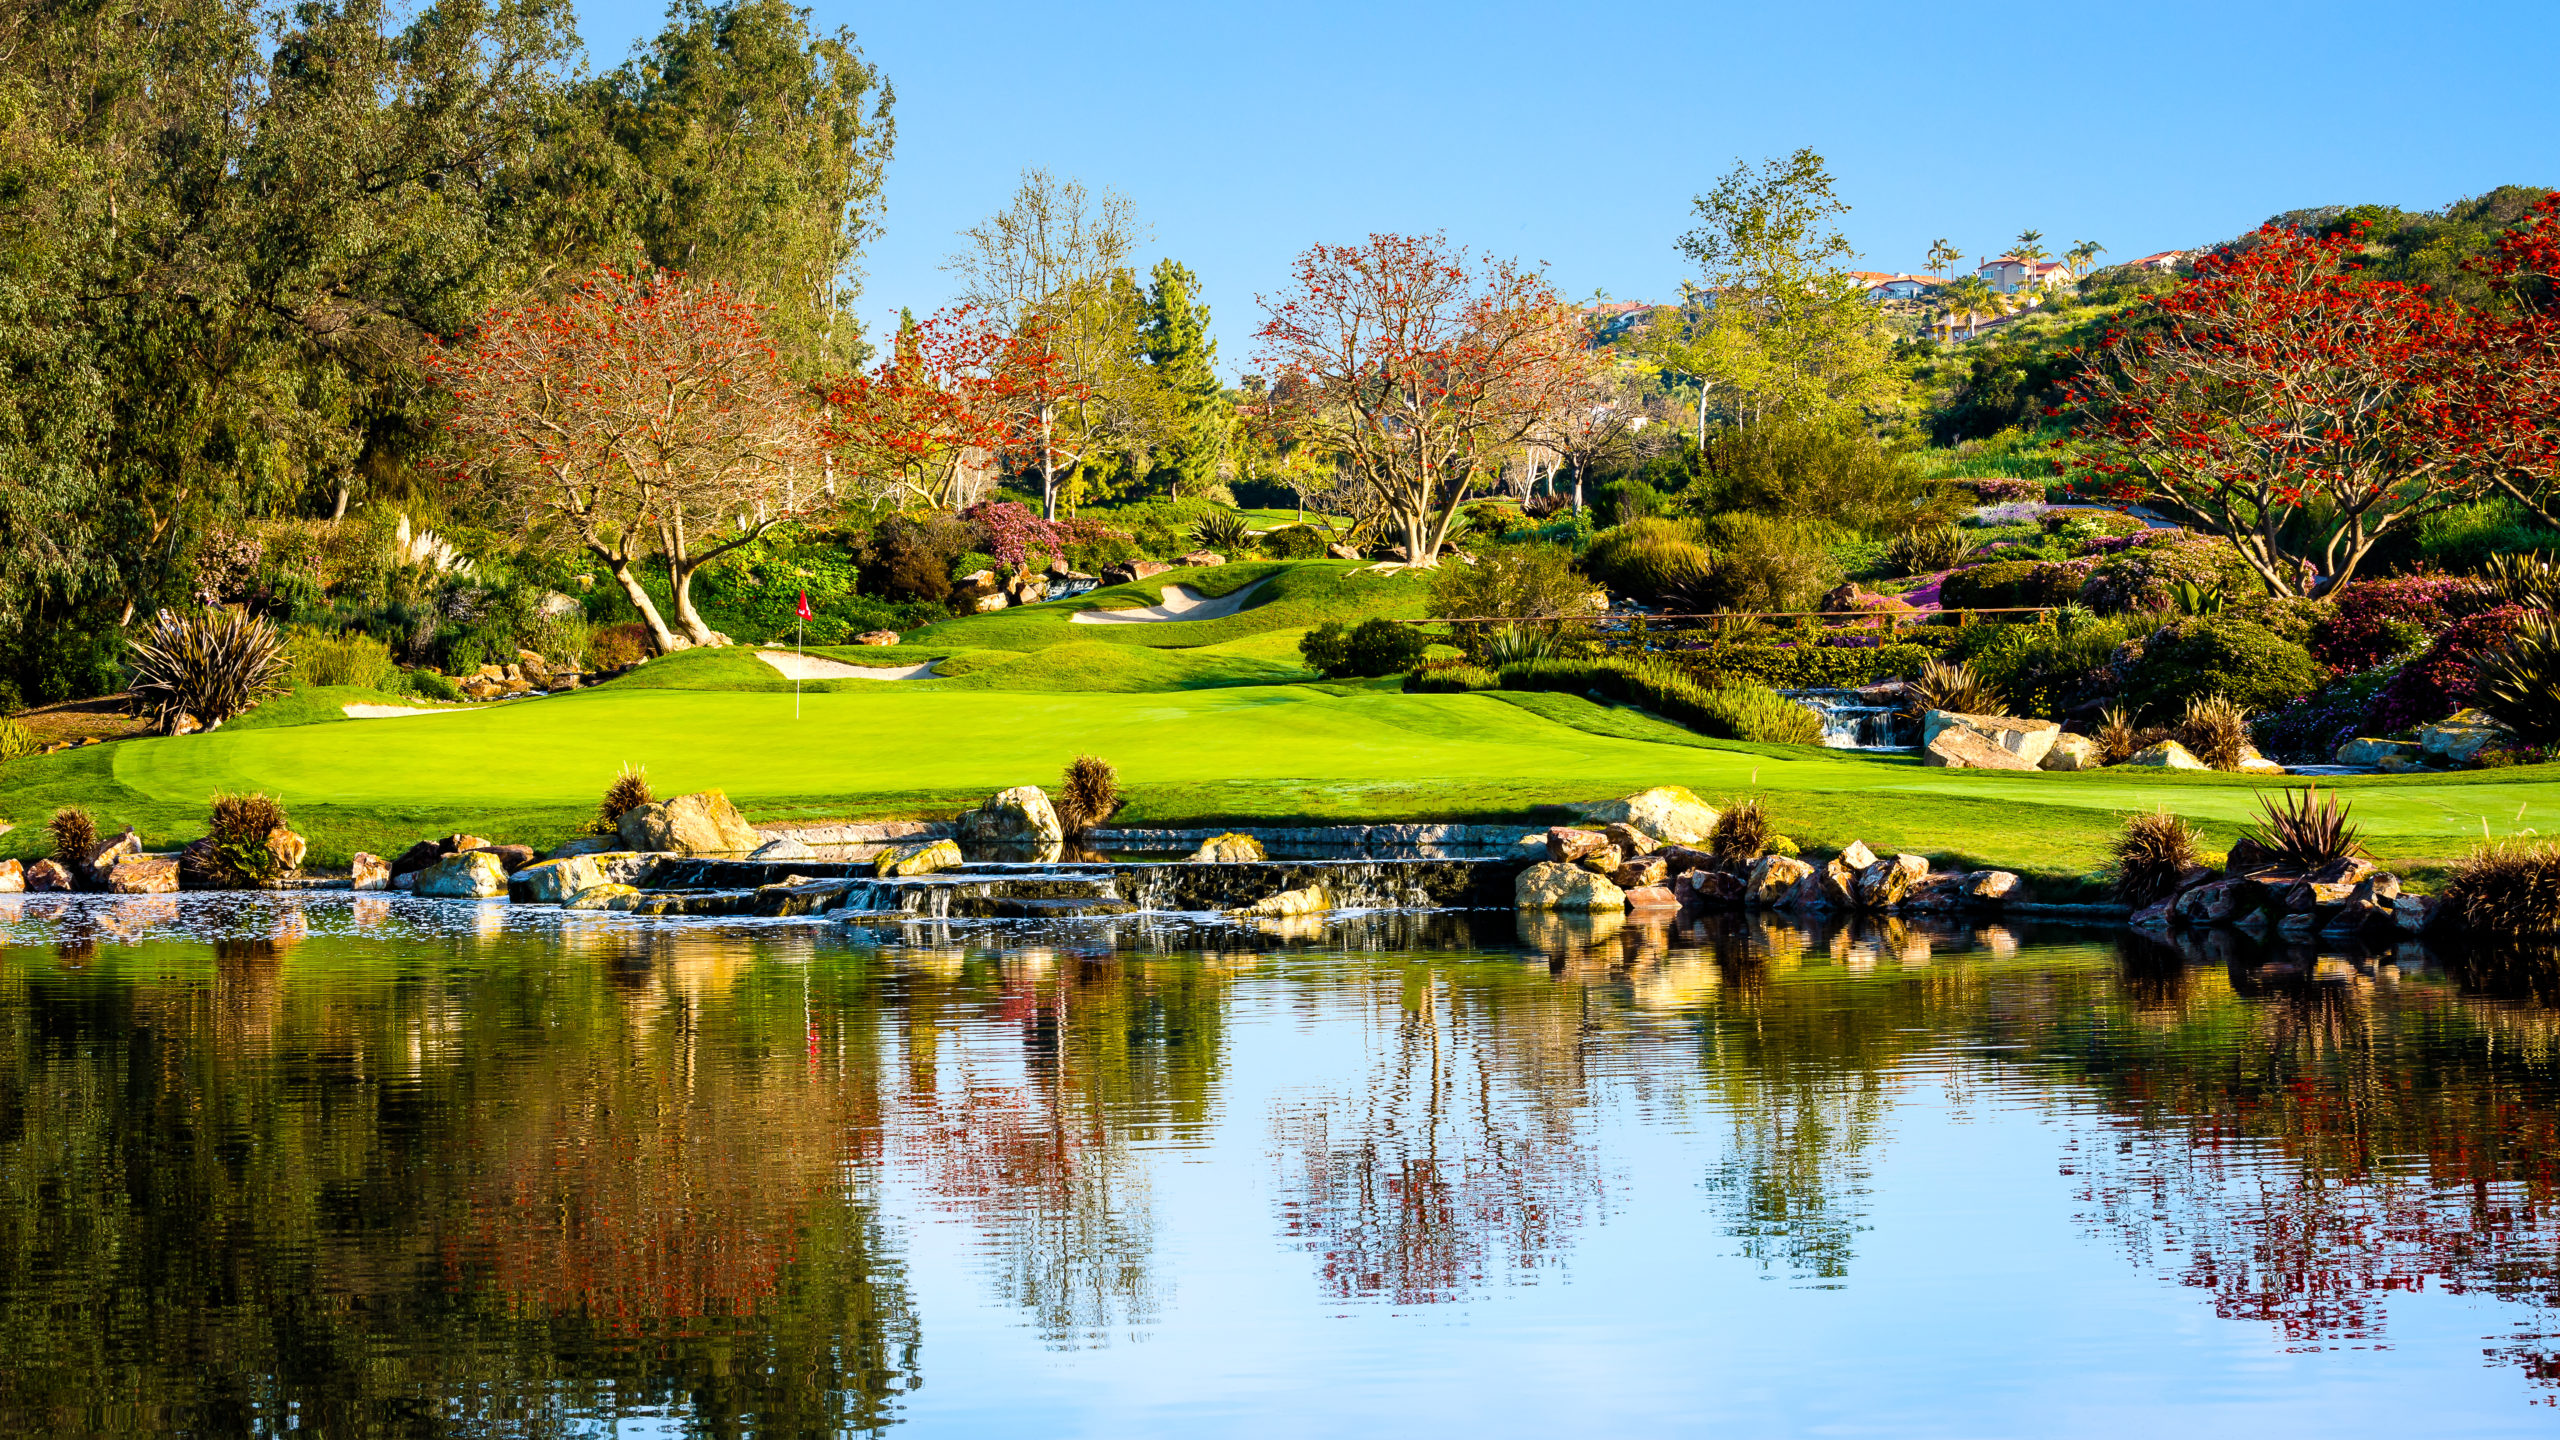 TOP 5 GOLF COURSES IN SAN DIEGO